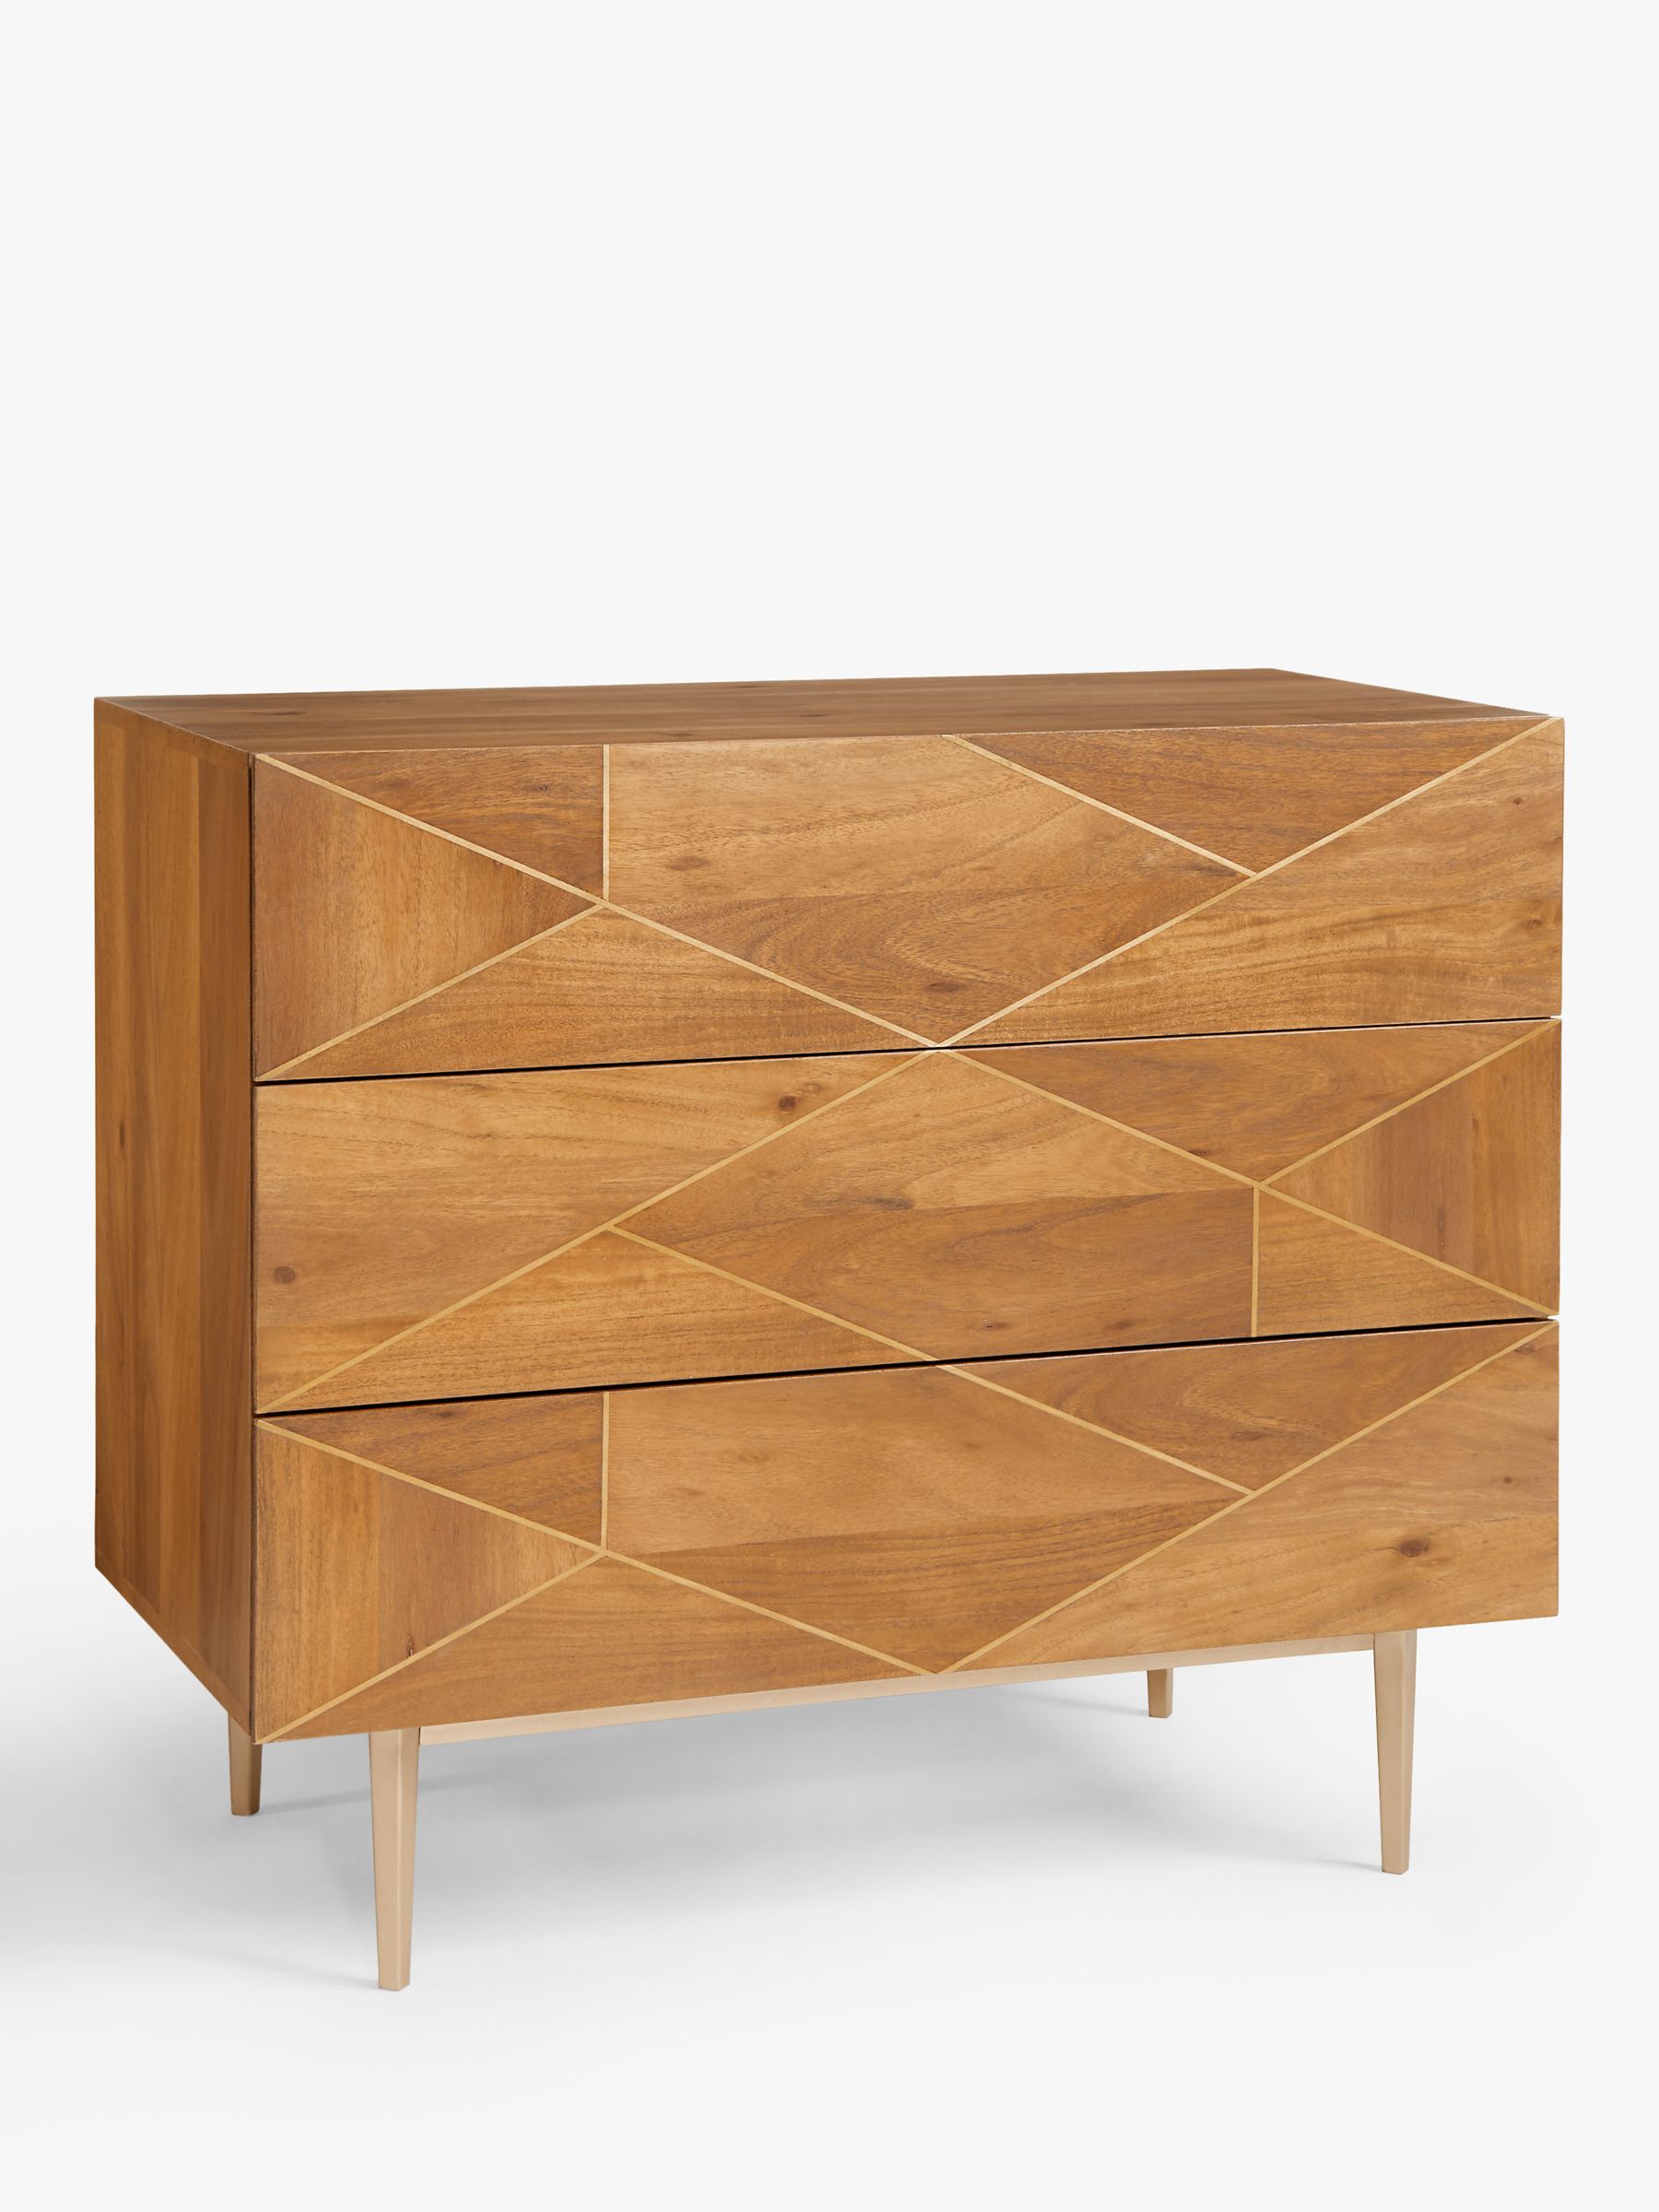 Photo of John lewis + swoon mendel 3 drawer chest